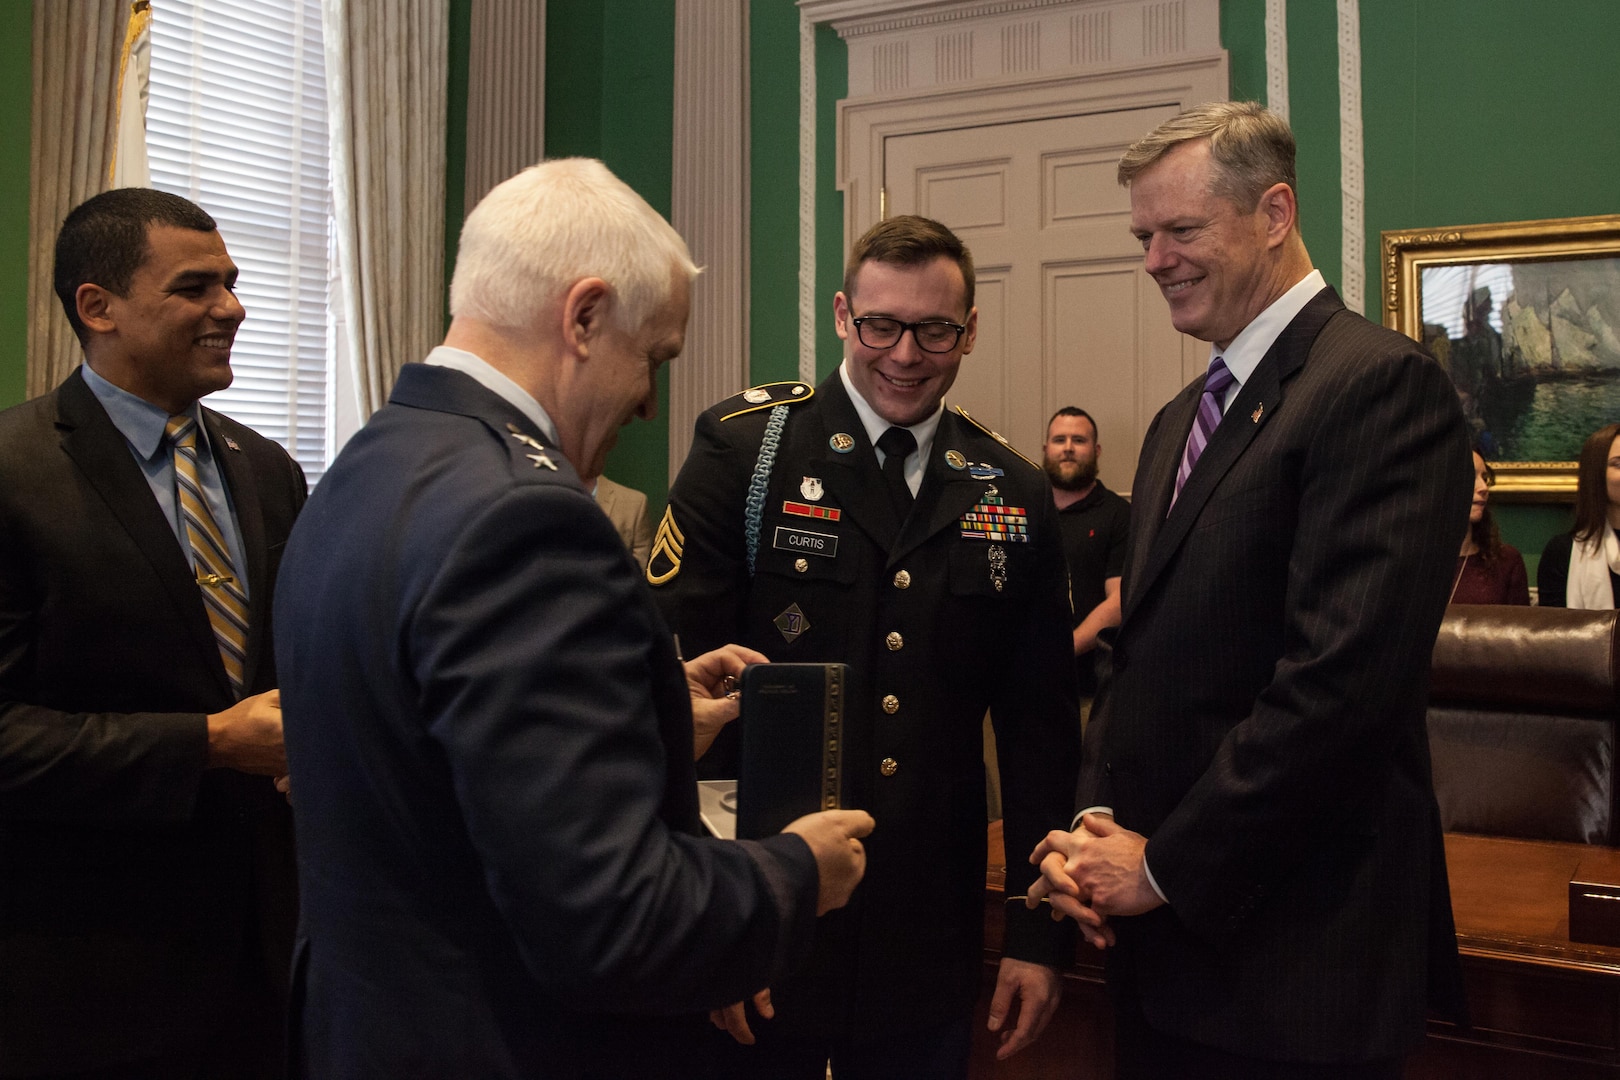 Maj. Gen. L Scott Rice, the adjutant general, presents the Soldiers Medal to Staff Sgt. Geoffrey Curtis. Curtis was awarded the medal by Massachusetts Governor Charlie Baker during a ceremony at the state house January 11, 2016. Curtis' award is in recognition of his swift response and heroic actions immediately following the Boston Marathon bombings in 2013.